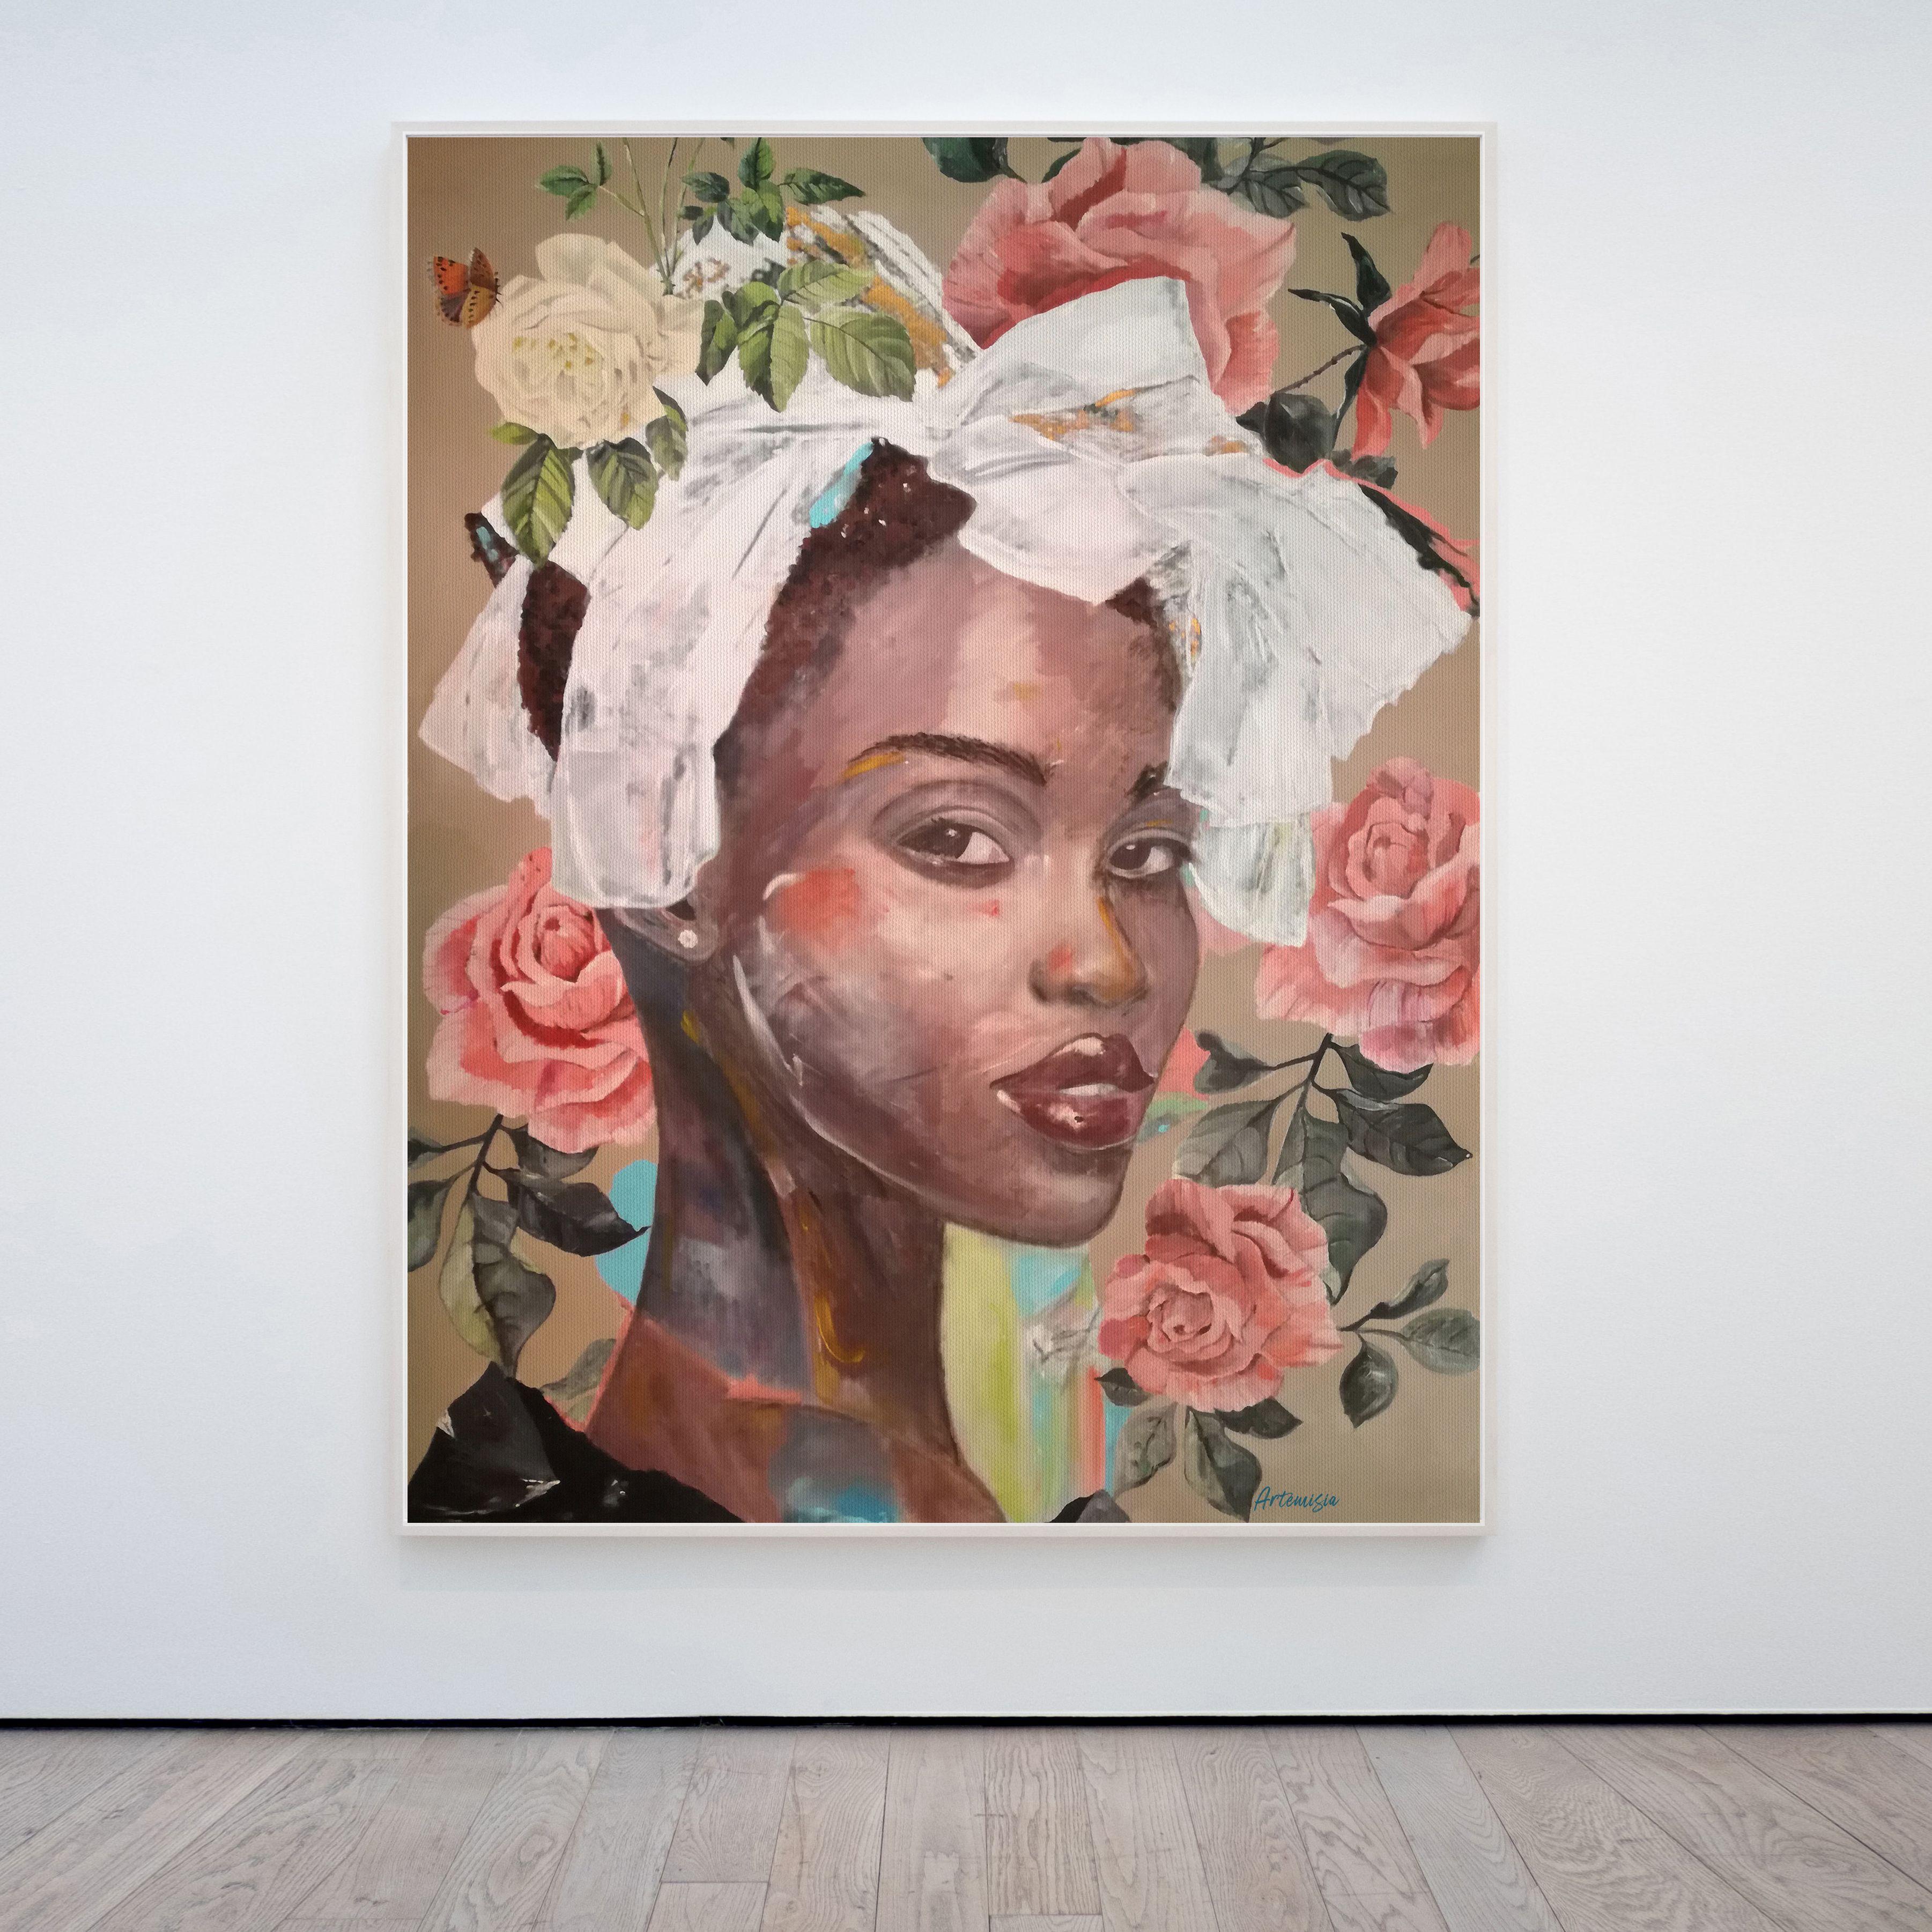 Art-Deco style, Colonial atmosphere, inspired by floral and dark skinned powerful beauty of Mary Ann - Mysterious Rose Collection. Large scale Cabarete composition painting on Canvas. Satin varnished protection. The colors are bright and vibrant.